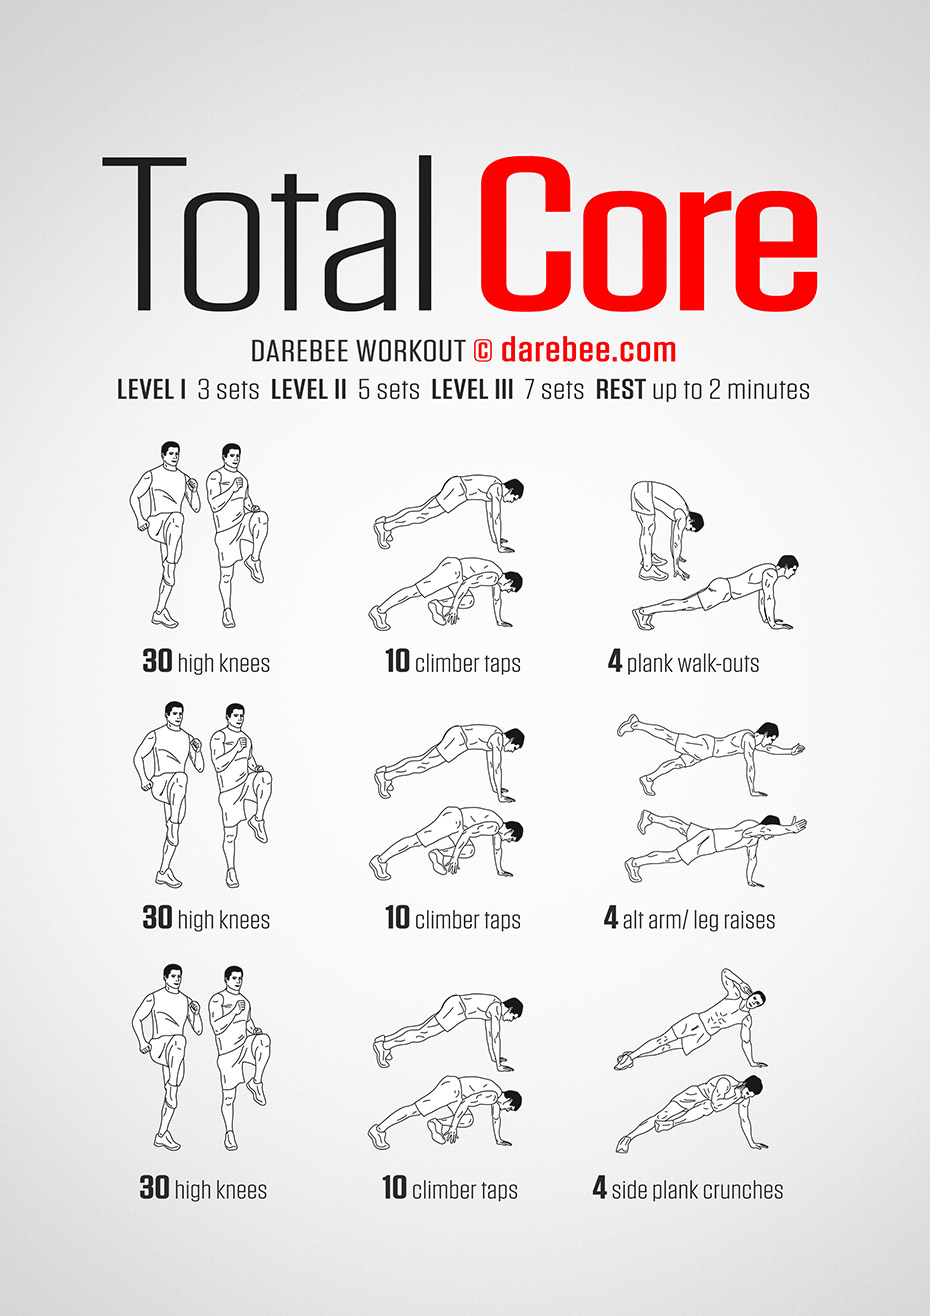 How long should core workout be?